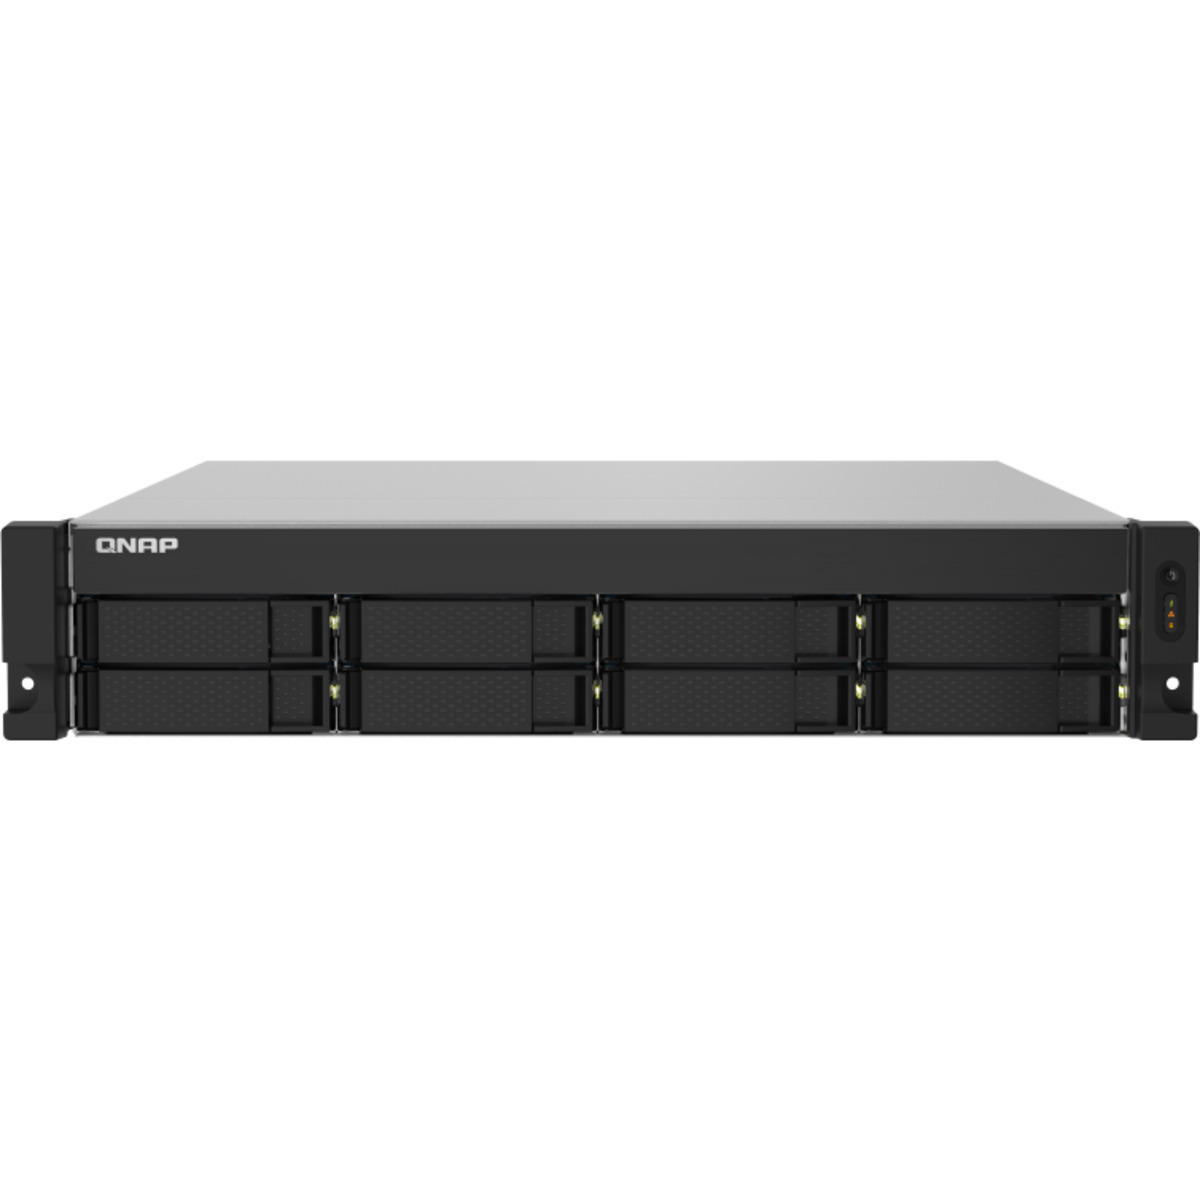 buy QNAP TS-832PXU-RP 32tb RackMount NAS - Network Attached Storage Device 8x4000gb Seagate BarraCuda ST4000DM004 3.5 7200rpm SATA 6Gb/s HDD CONSUMER Class Drives Installed - Burn-In Tested - FREE RAM UPGRADE - nas headquarters buy network attached storage server device das new raid-5 free shipping simply usa TS-832PXU-RP